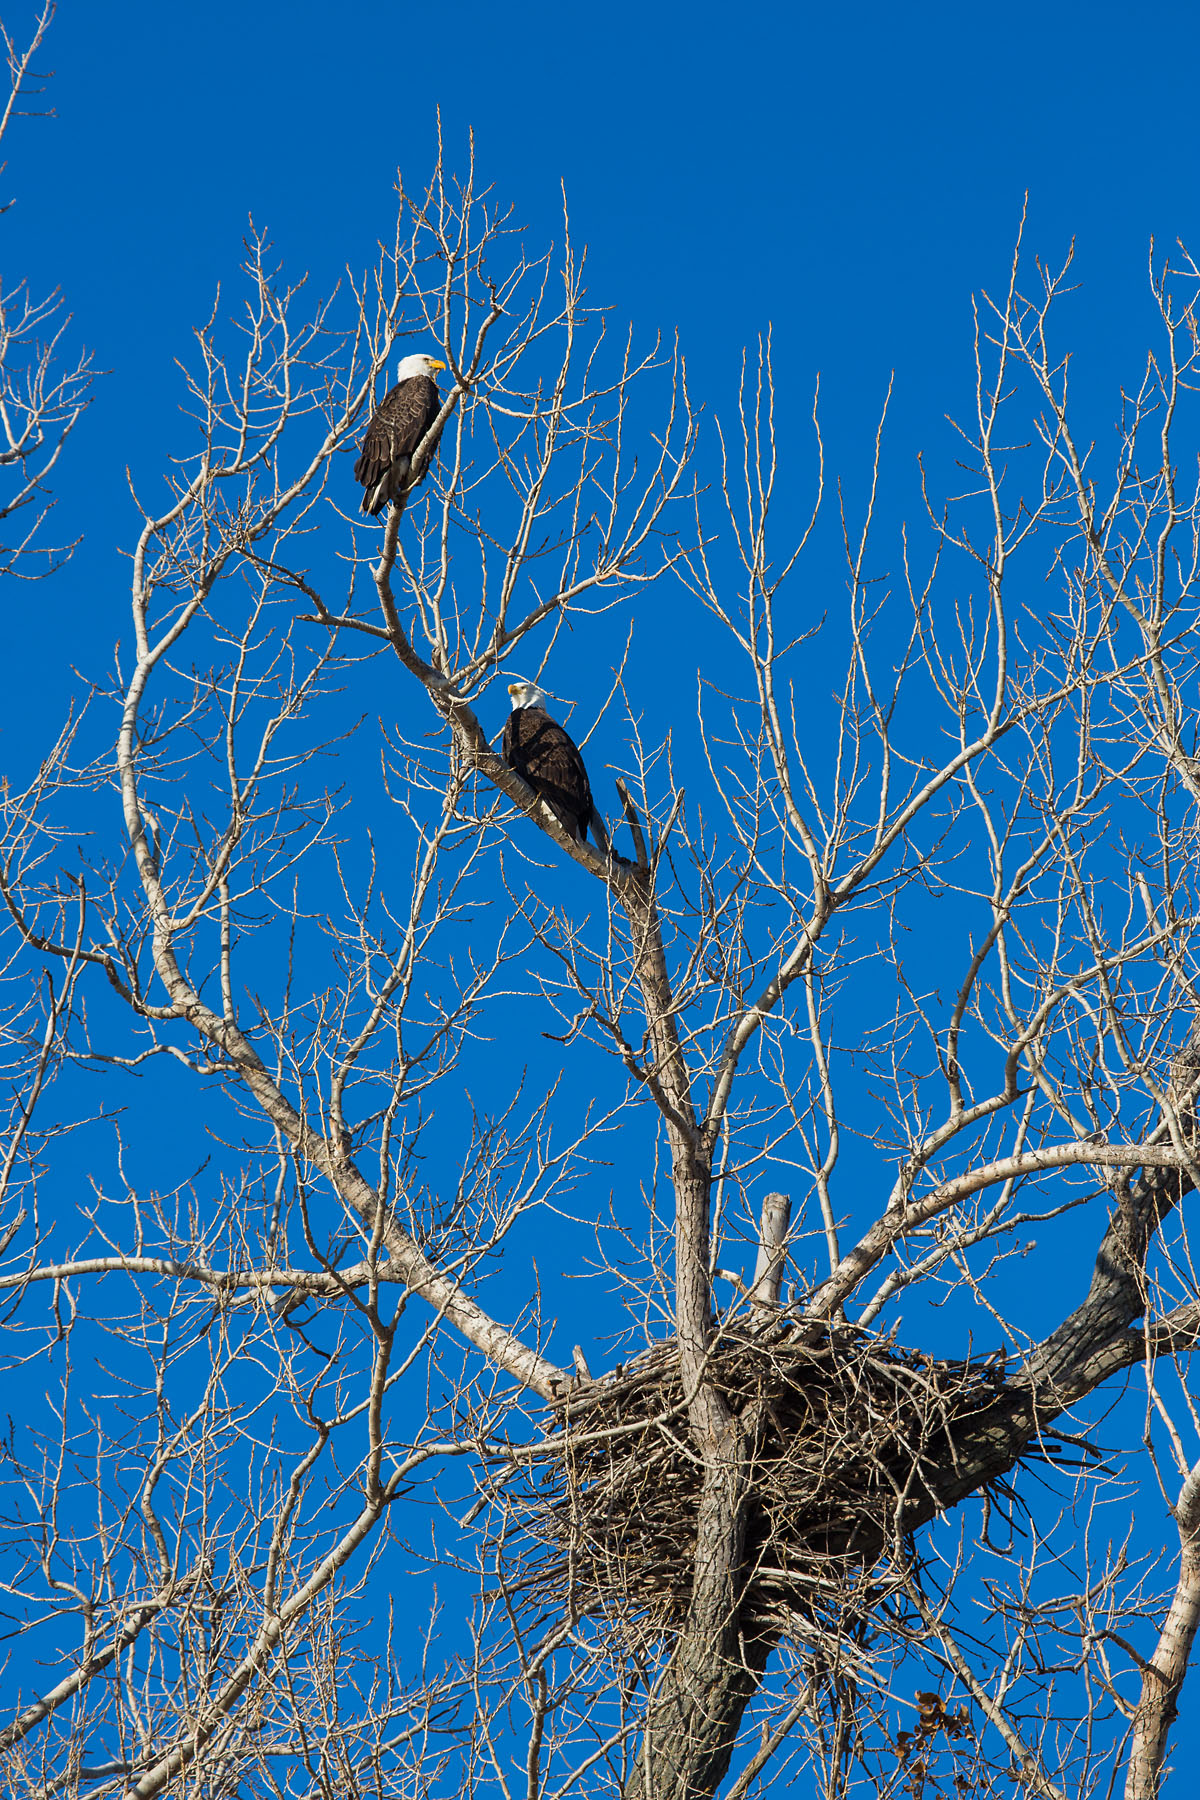 Bald Eagles near the nest, Loess Bluffs NWR.  Click for next photo.